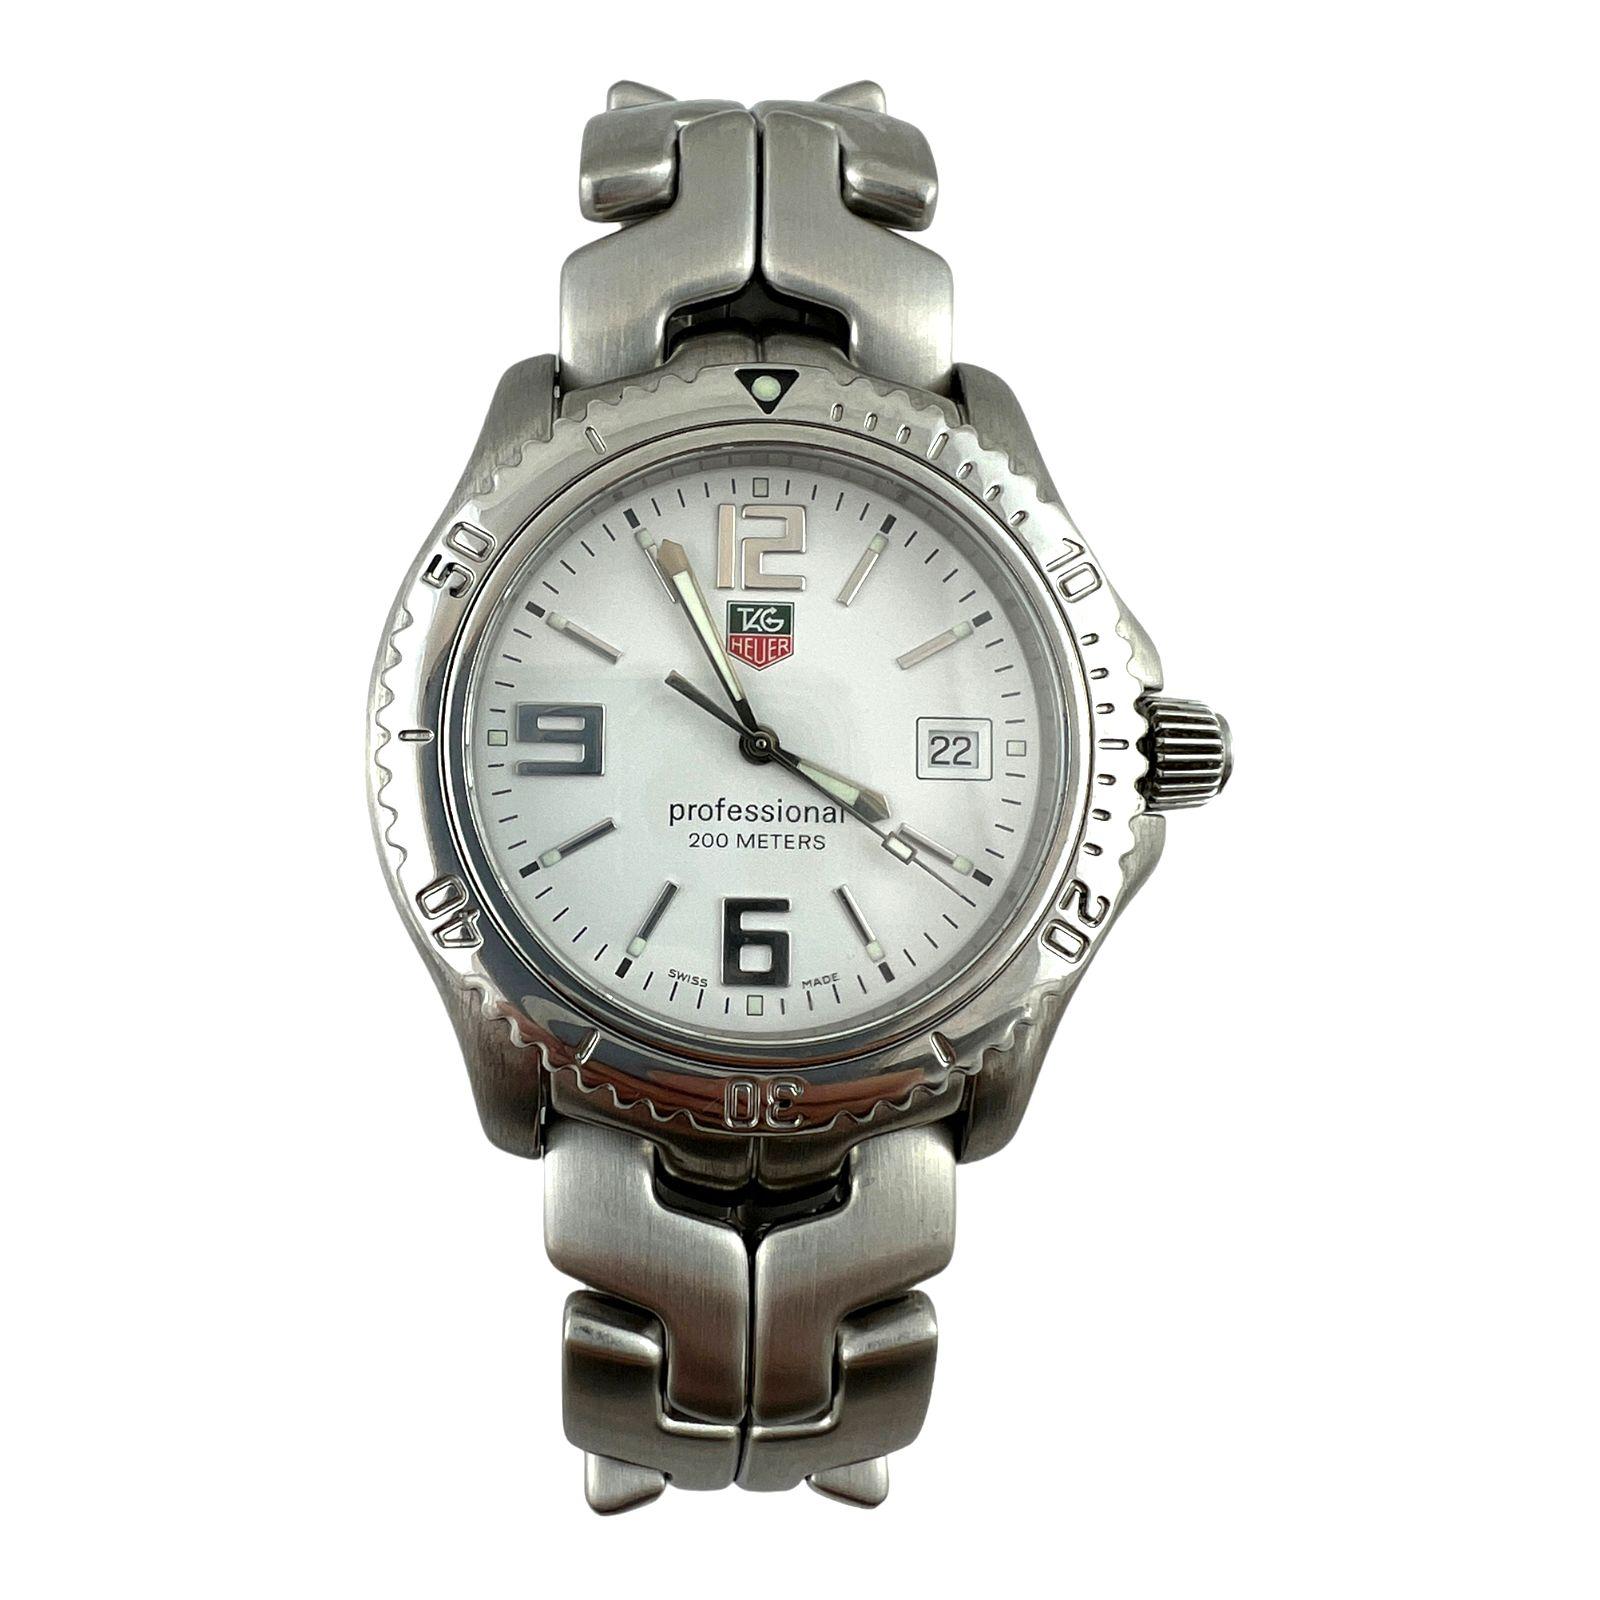 TAG Heuer Professional Watch

Model: WT1114
Serial: US8644

This TAG watch is set in stainless steel

42mm case

White dial with silver markers

Quartz movement

Watch fits up to 6.25